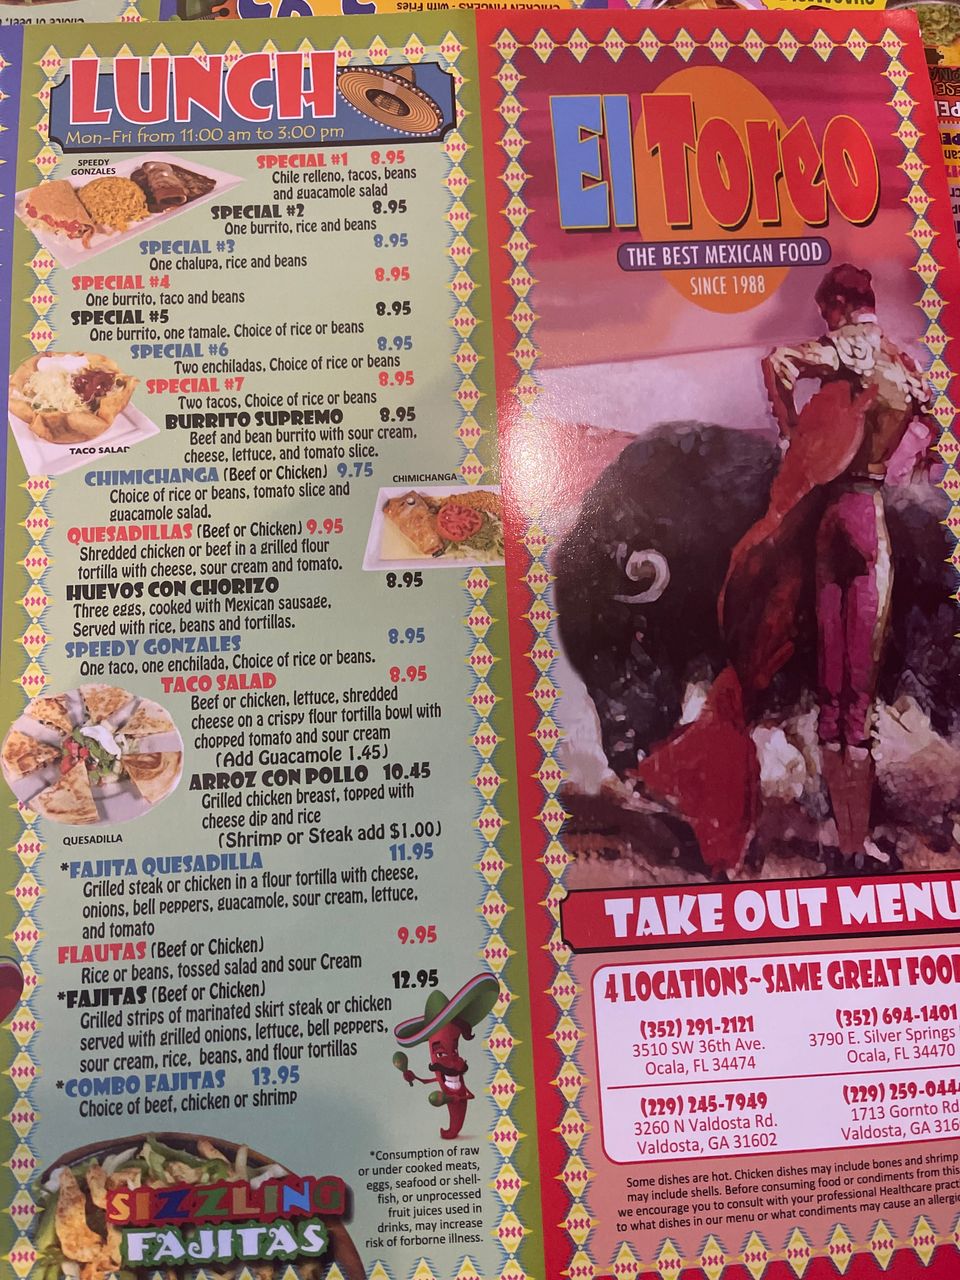 El toreo menu temporary photo lunch and take out